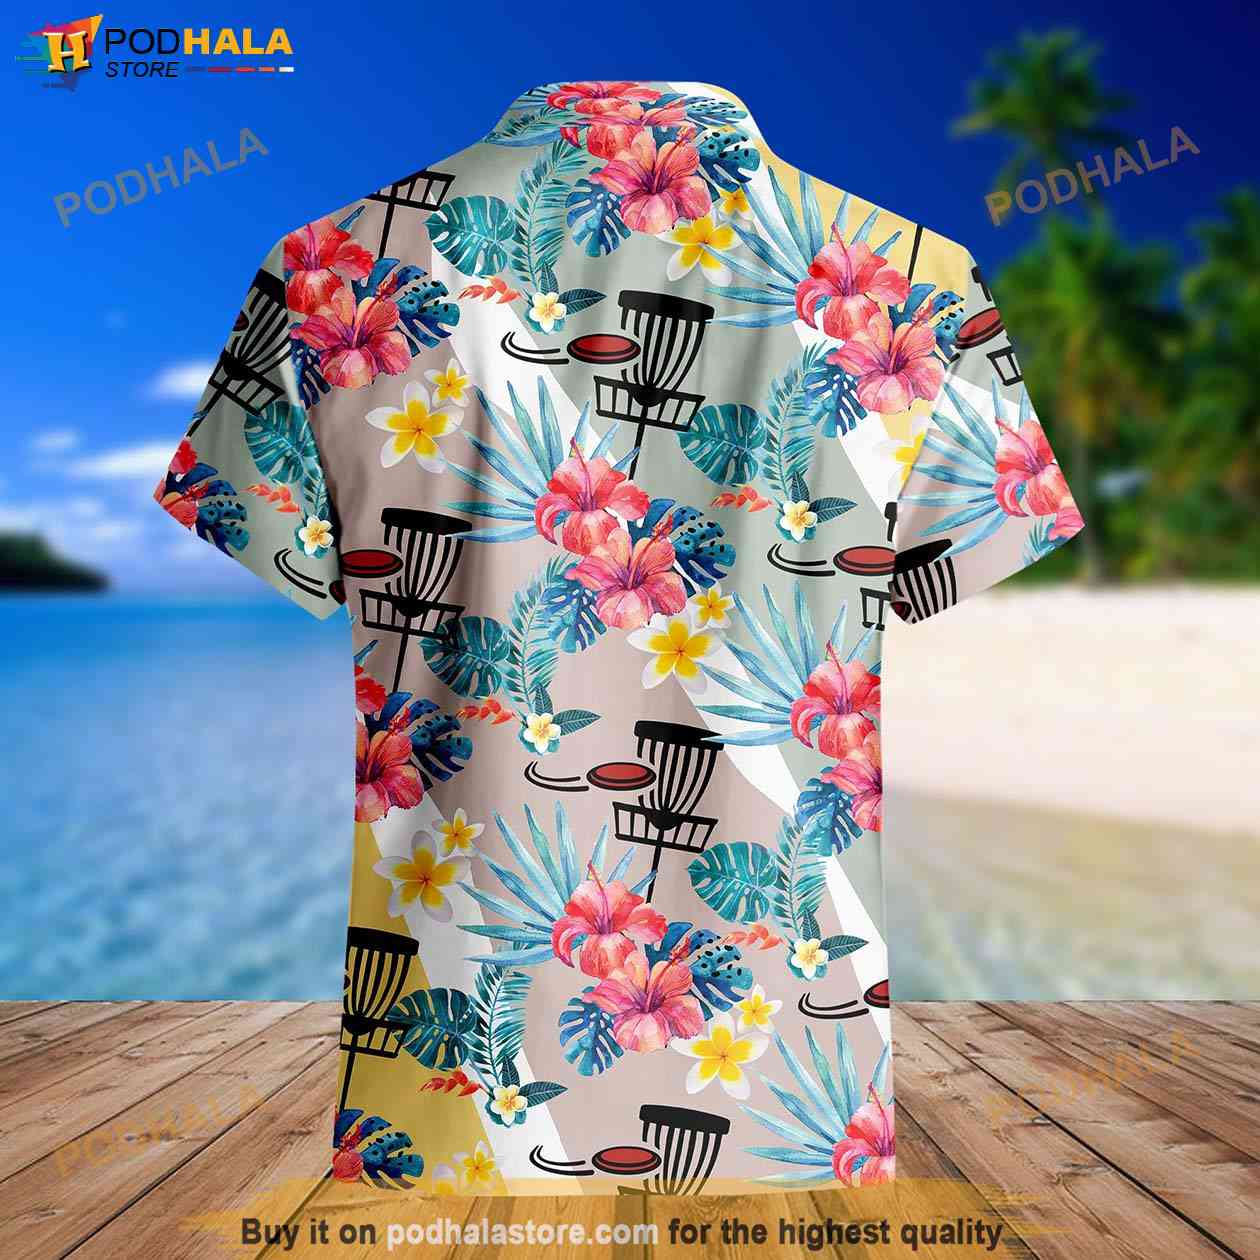 Philadelphia Eagles Hawaiian Shirt Fly Eagles Fly Unique Philadelphia Eagles  Gift - Personalized Gifts: Family, Sports, Occasions, Trending